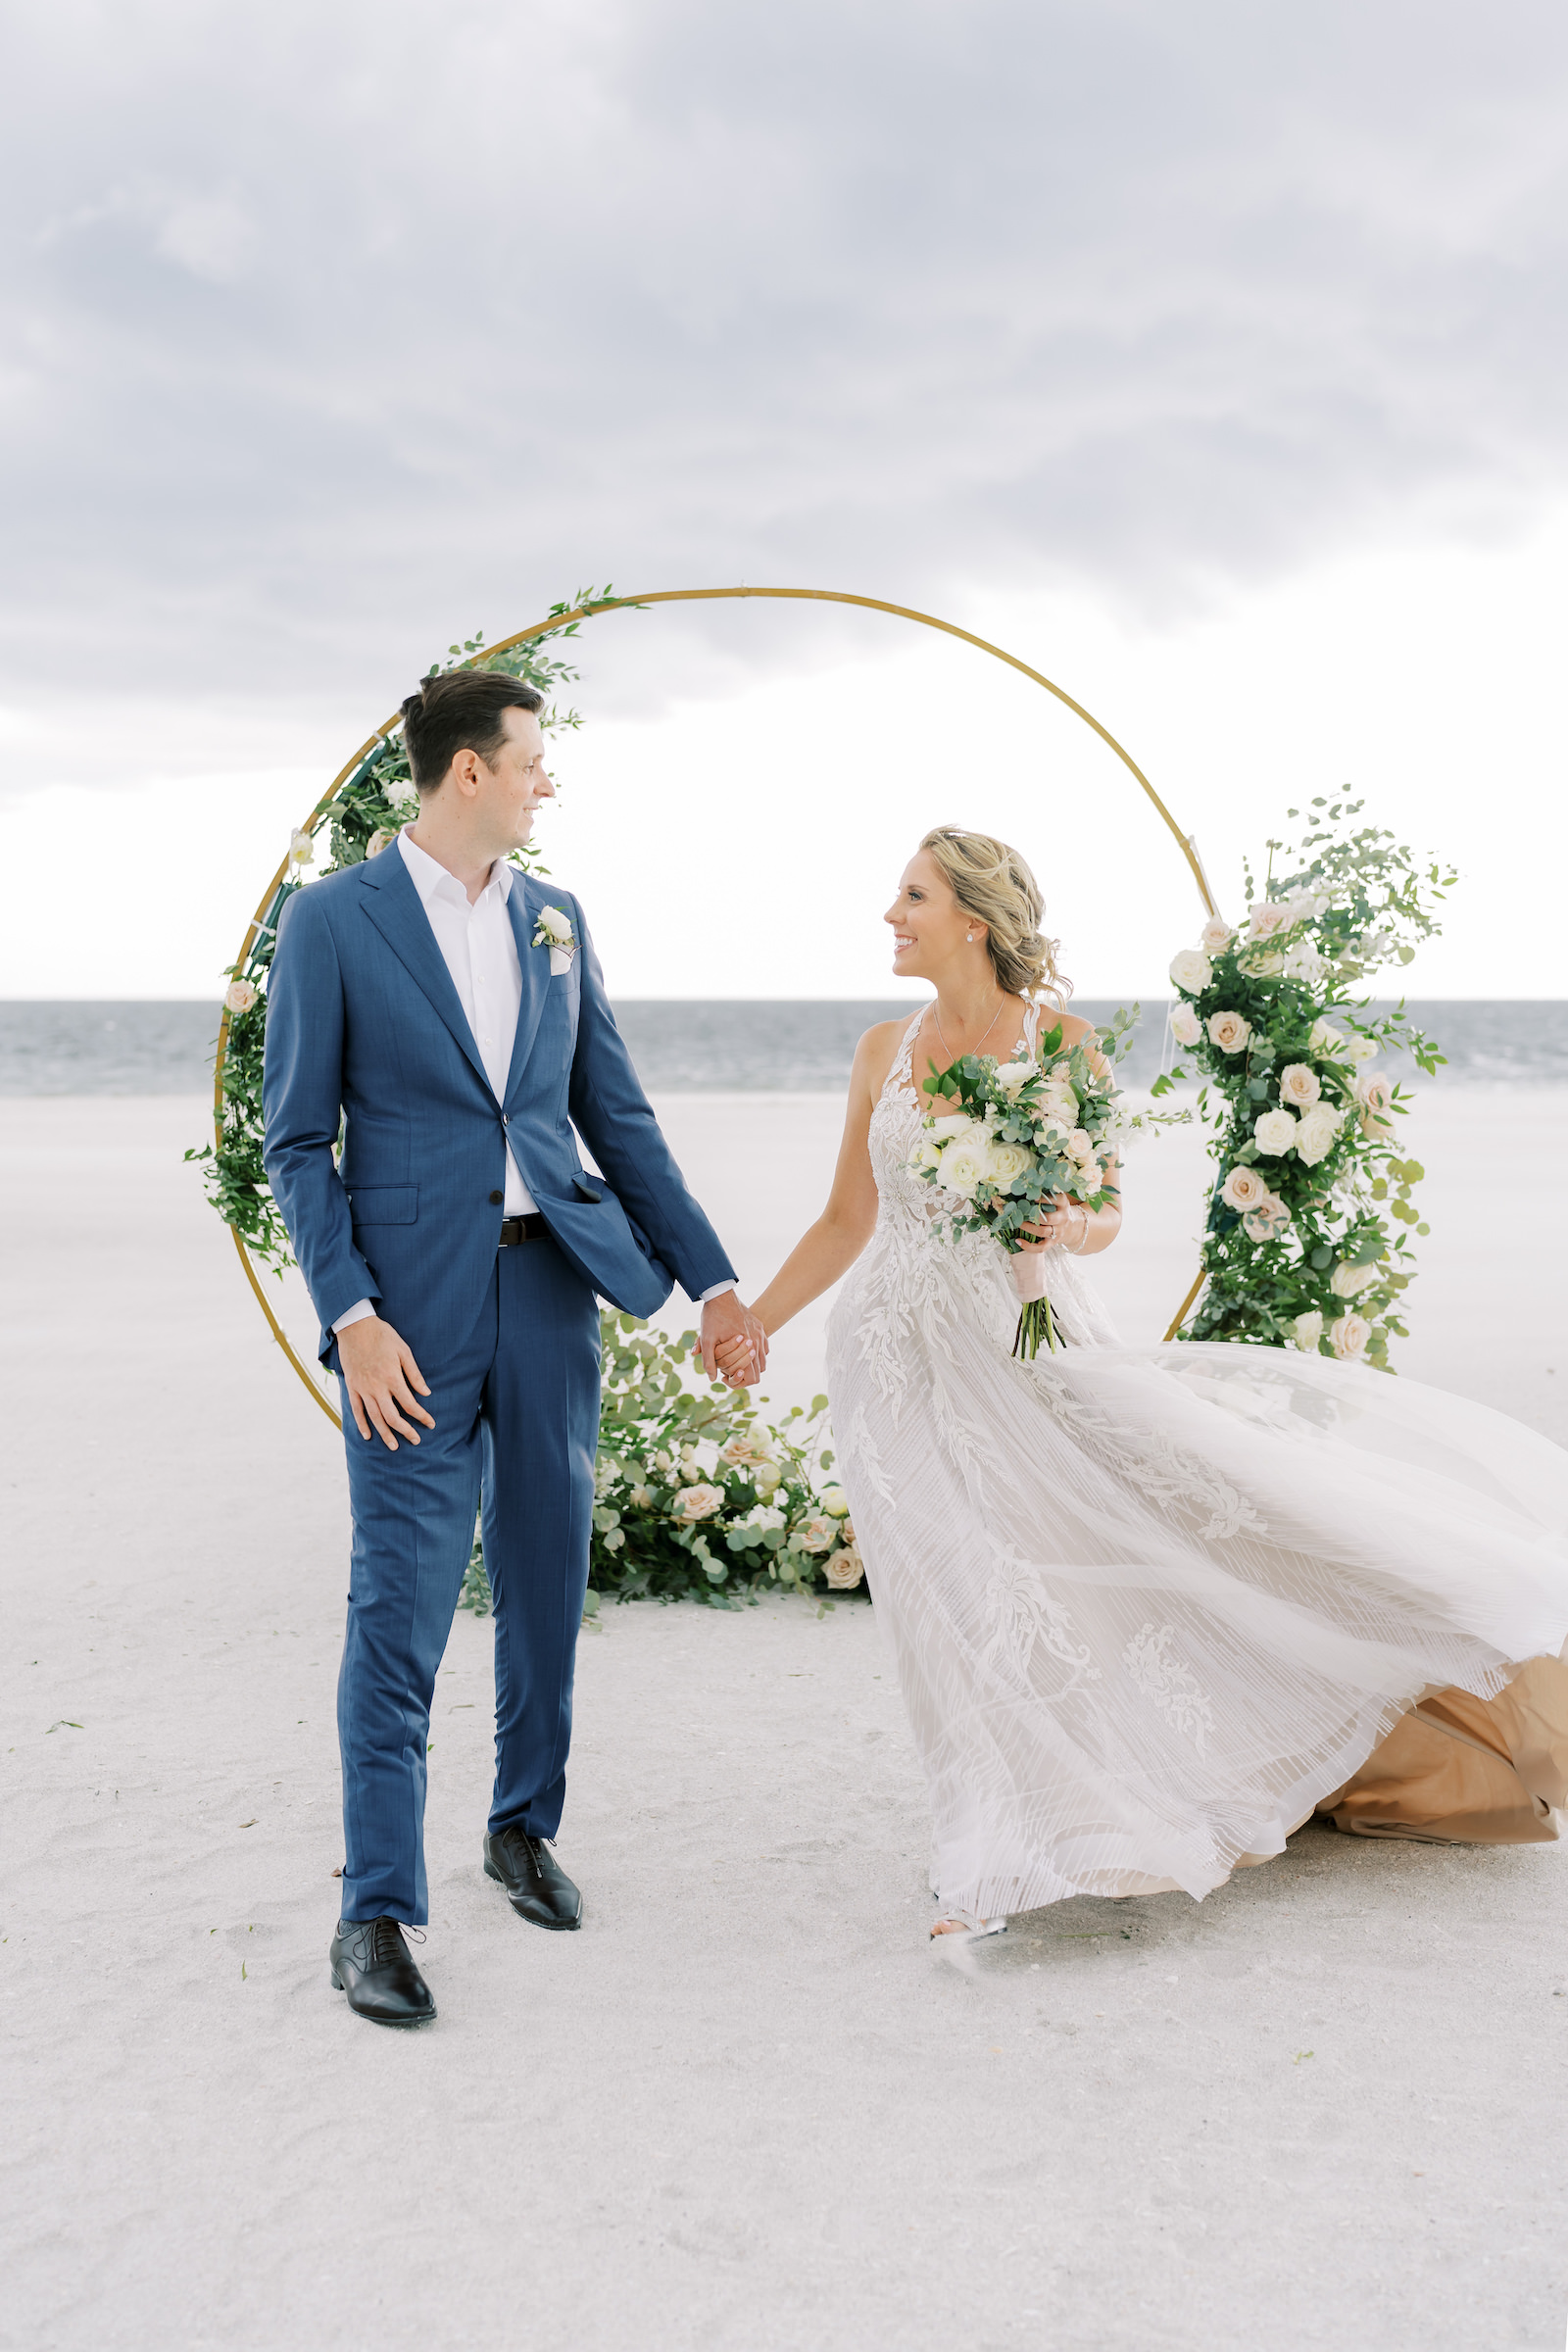 Bride and Groom Holding Hands Wedding Portrait | Outdoor Elegant Wedding Ceremony with Gold and Floral Greenery Arch